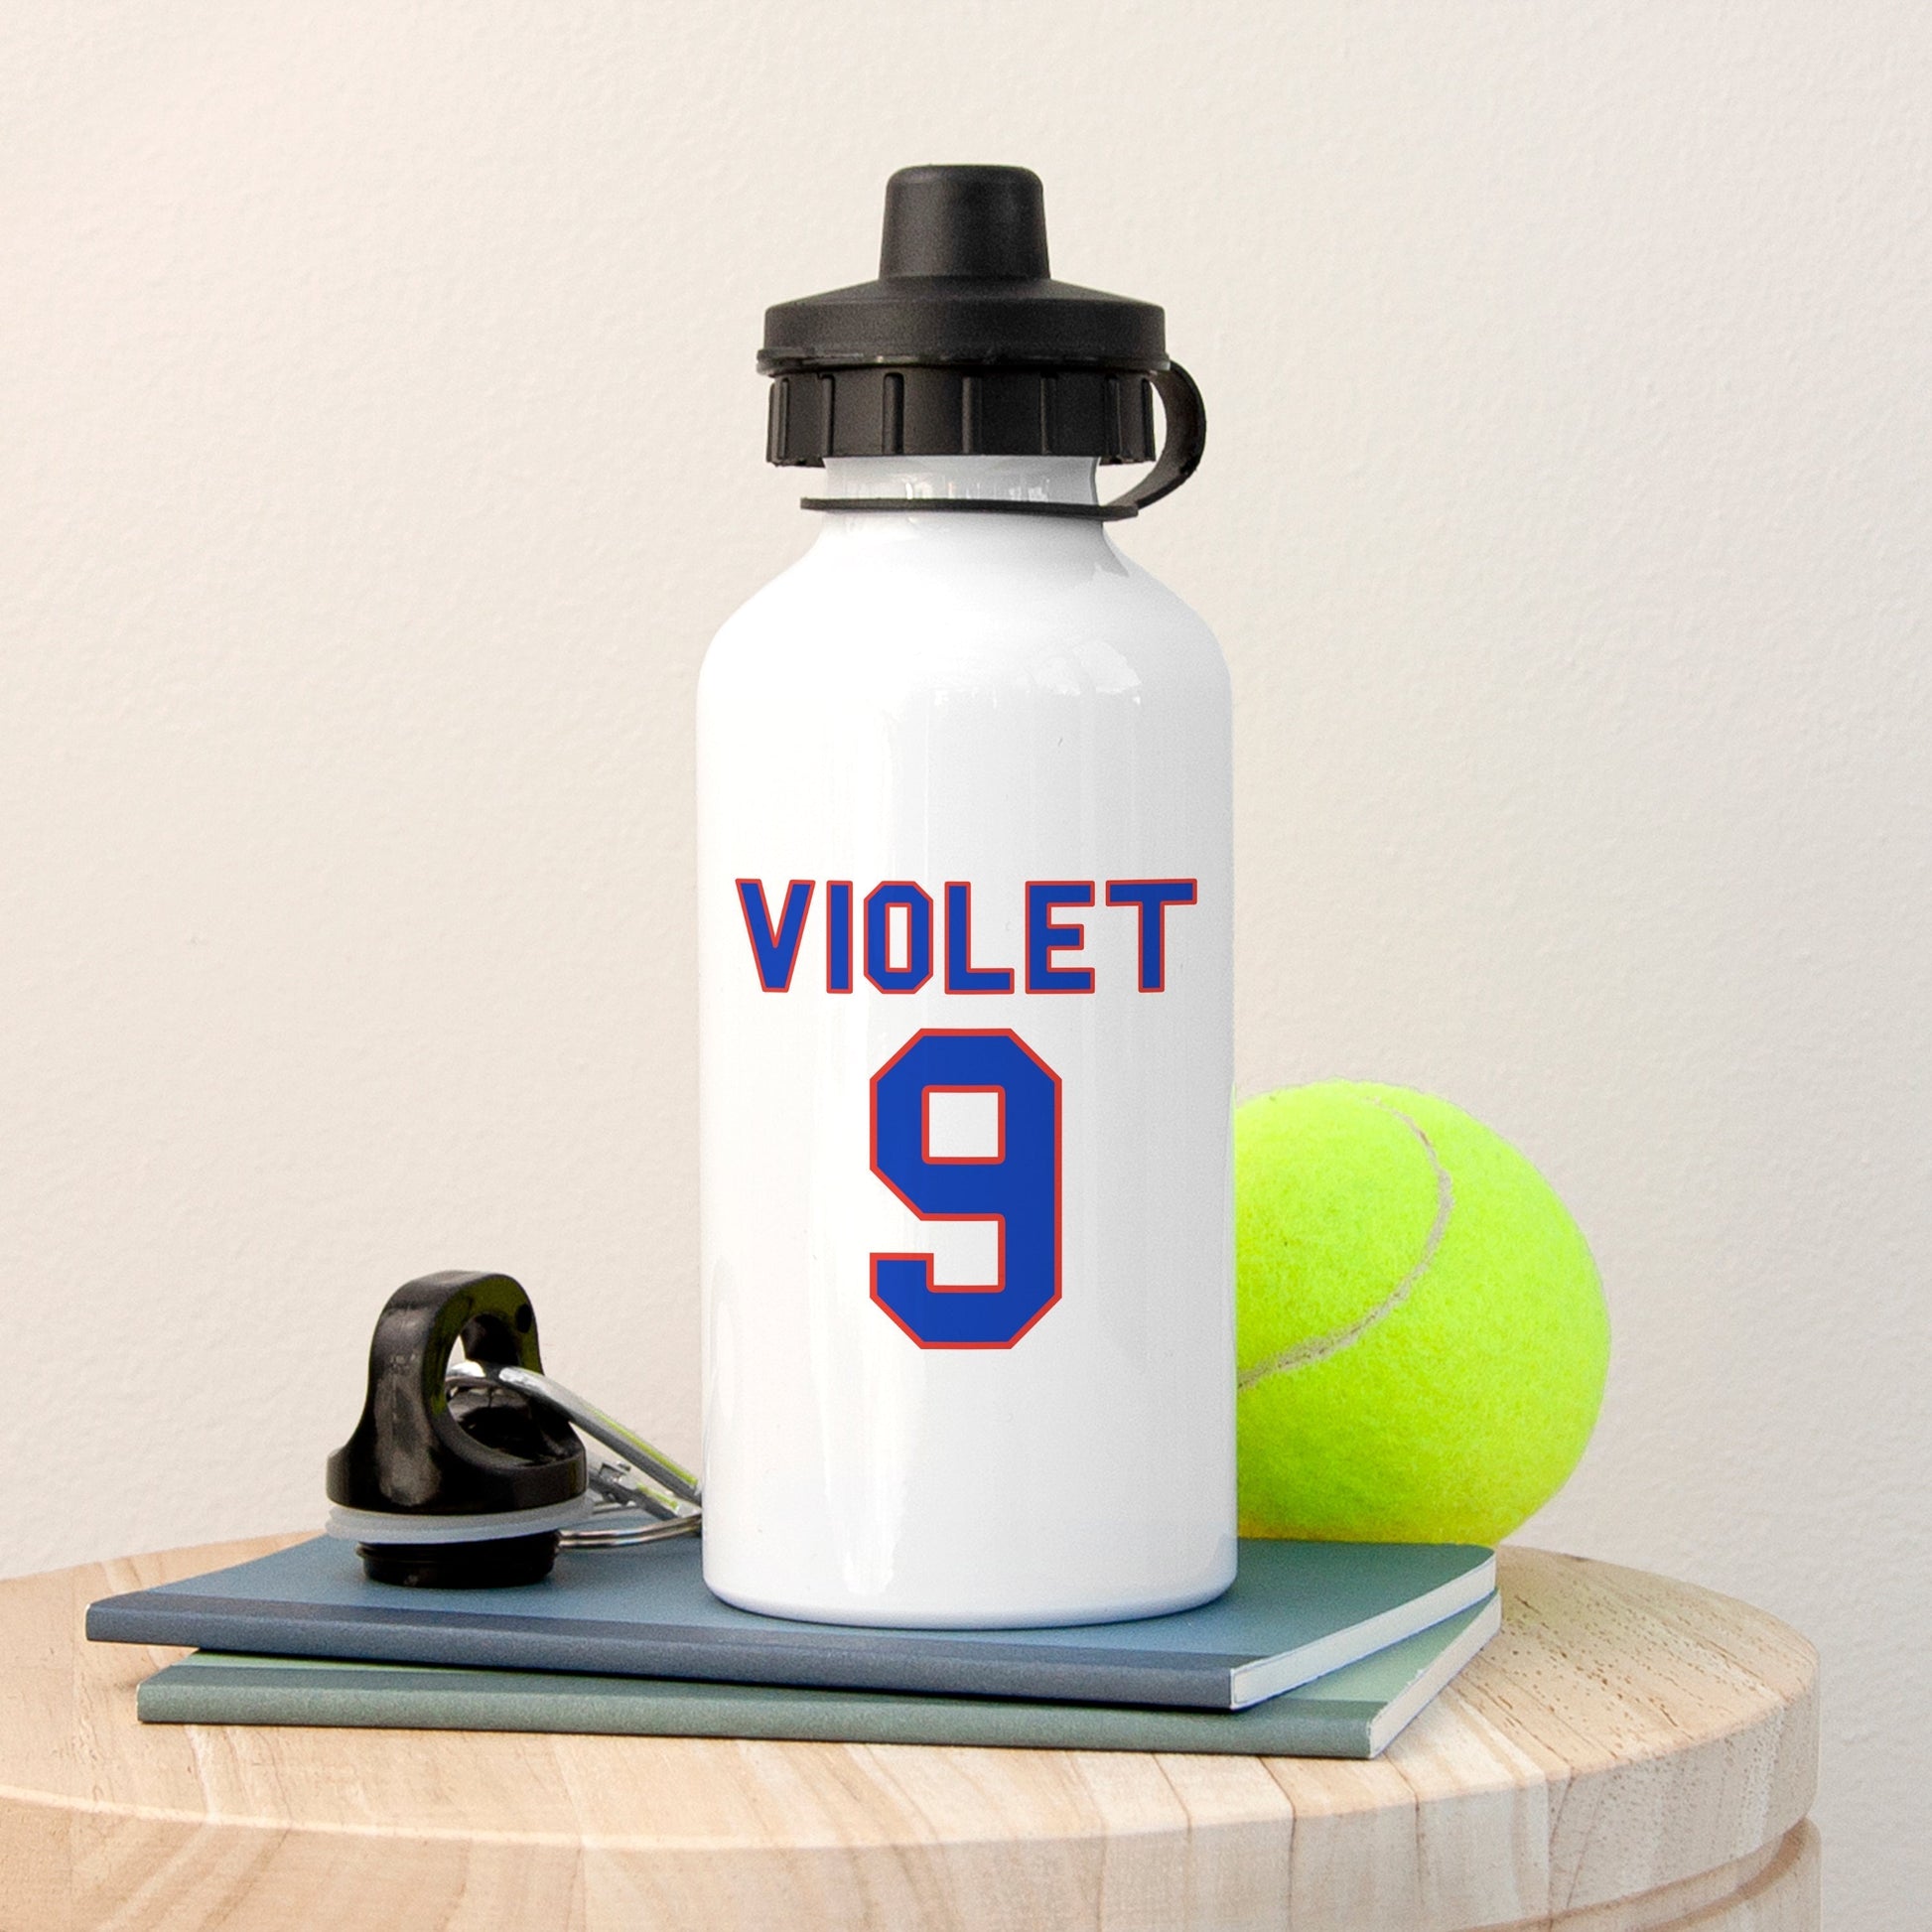 Personalized Water Bottles - Personalized Shirt Number Water Bottle 